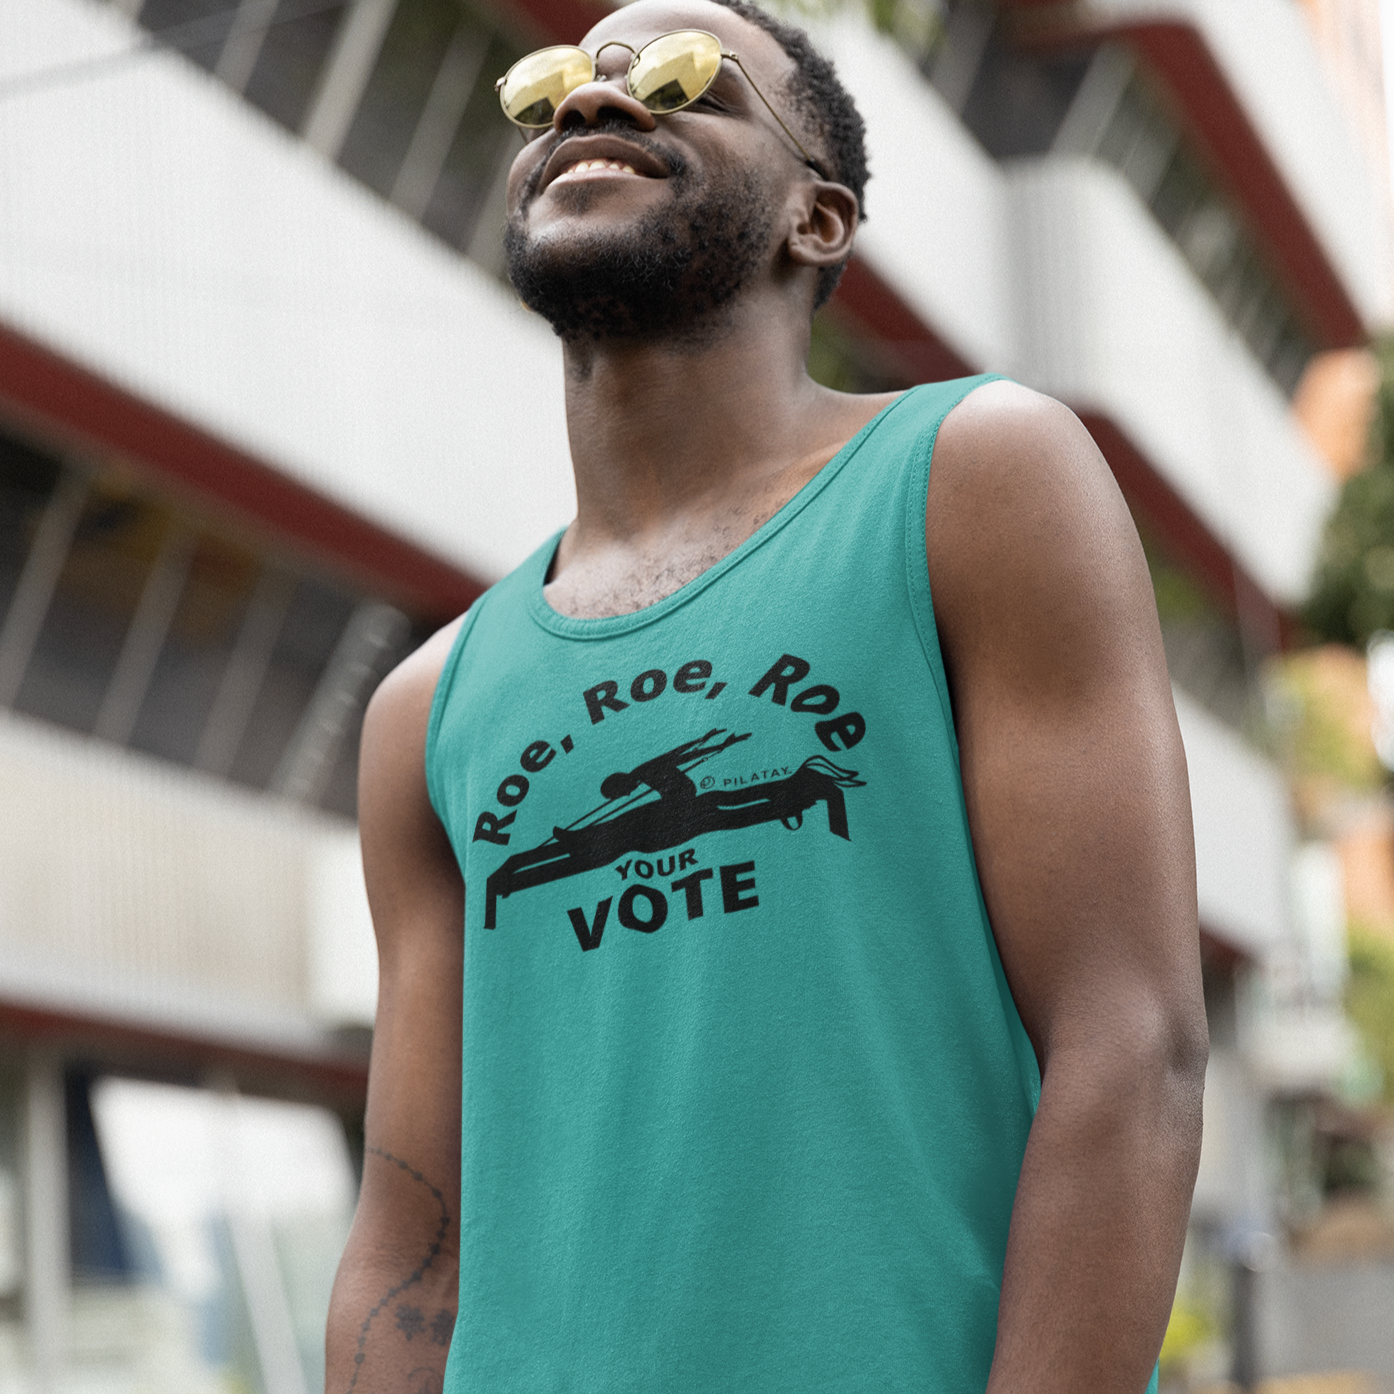 Roe Roe Roe Your Vote Pilates Tank Top - Funny Pilates Tanks and Shirts by PIlatay - Pilates Reformer Shirt  - PIlates Shirts For Men by Pilatay